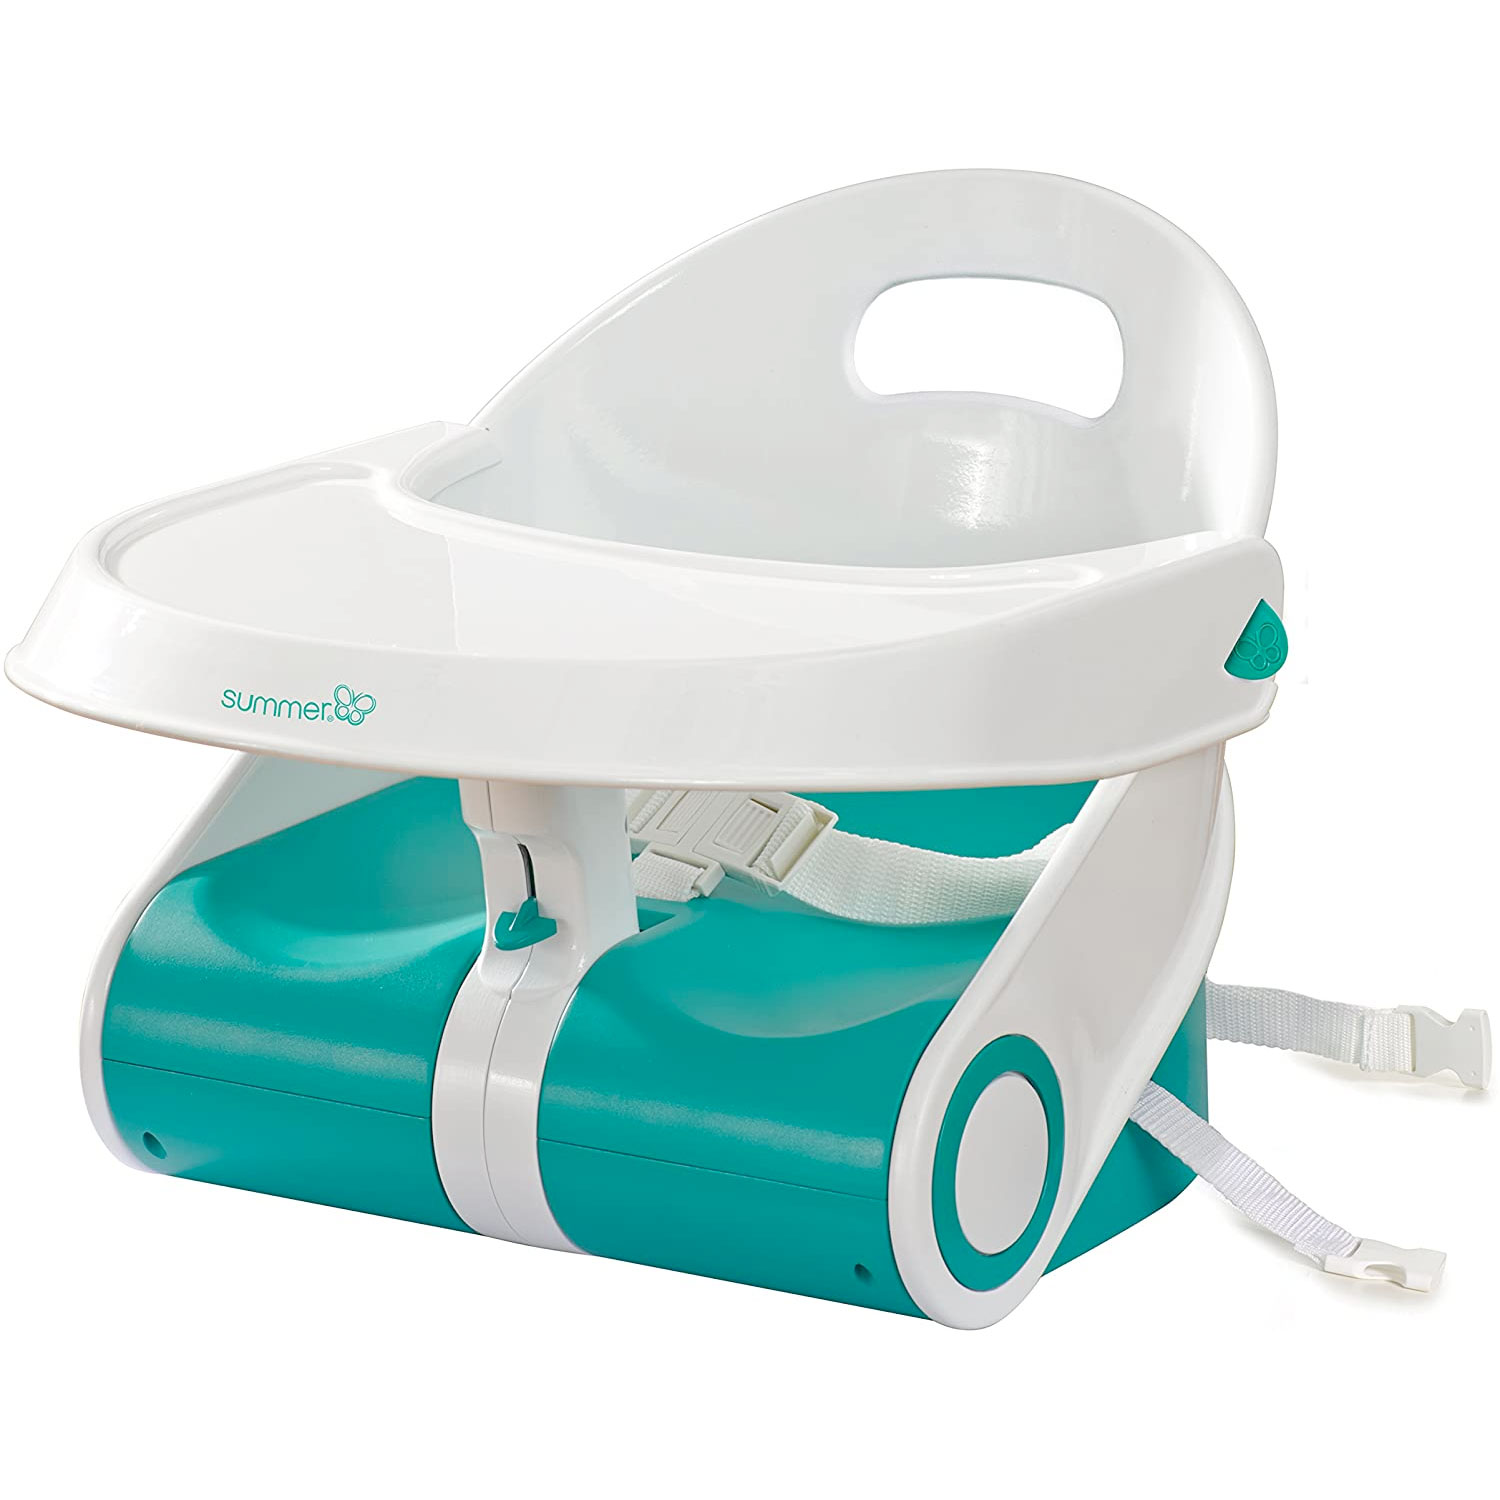 Amazon：Summer Infant Sit ‘N Style Booster Seat只賣$24.97